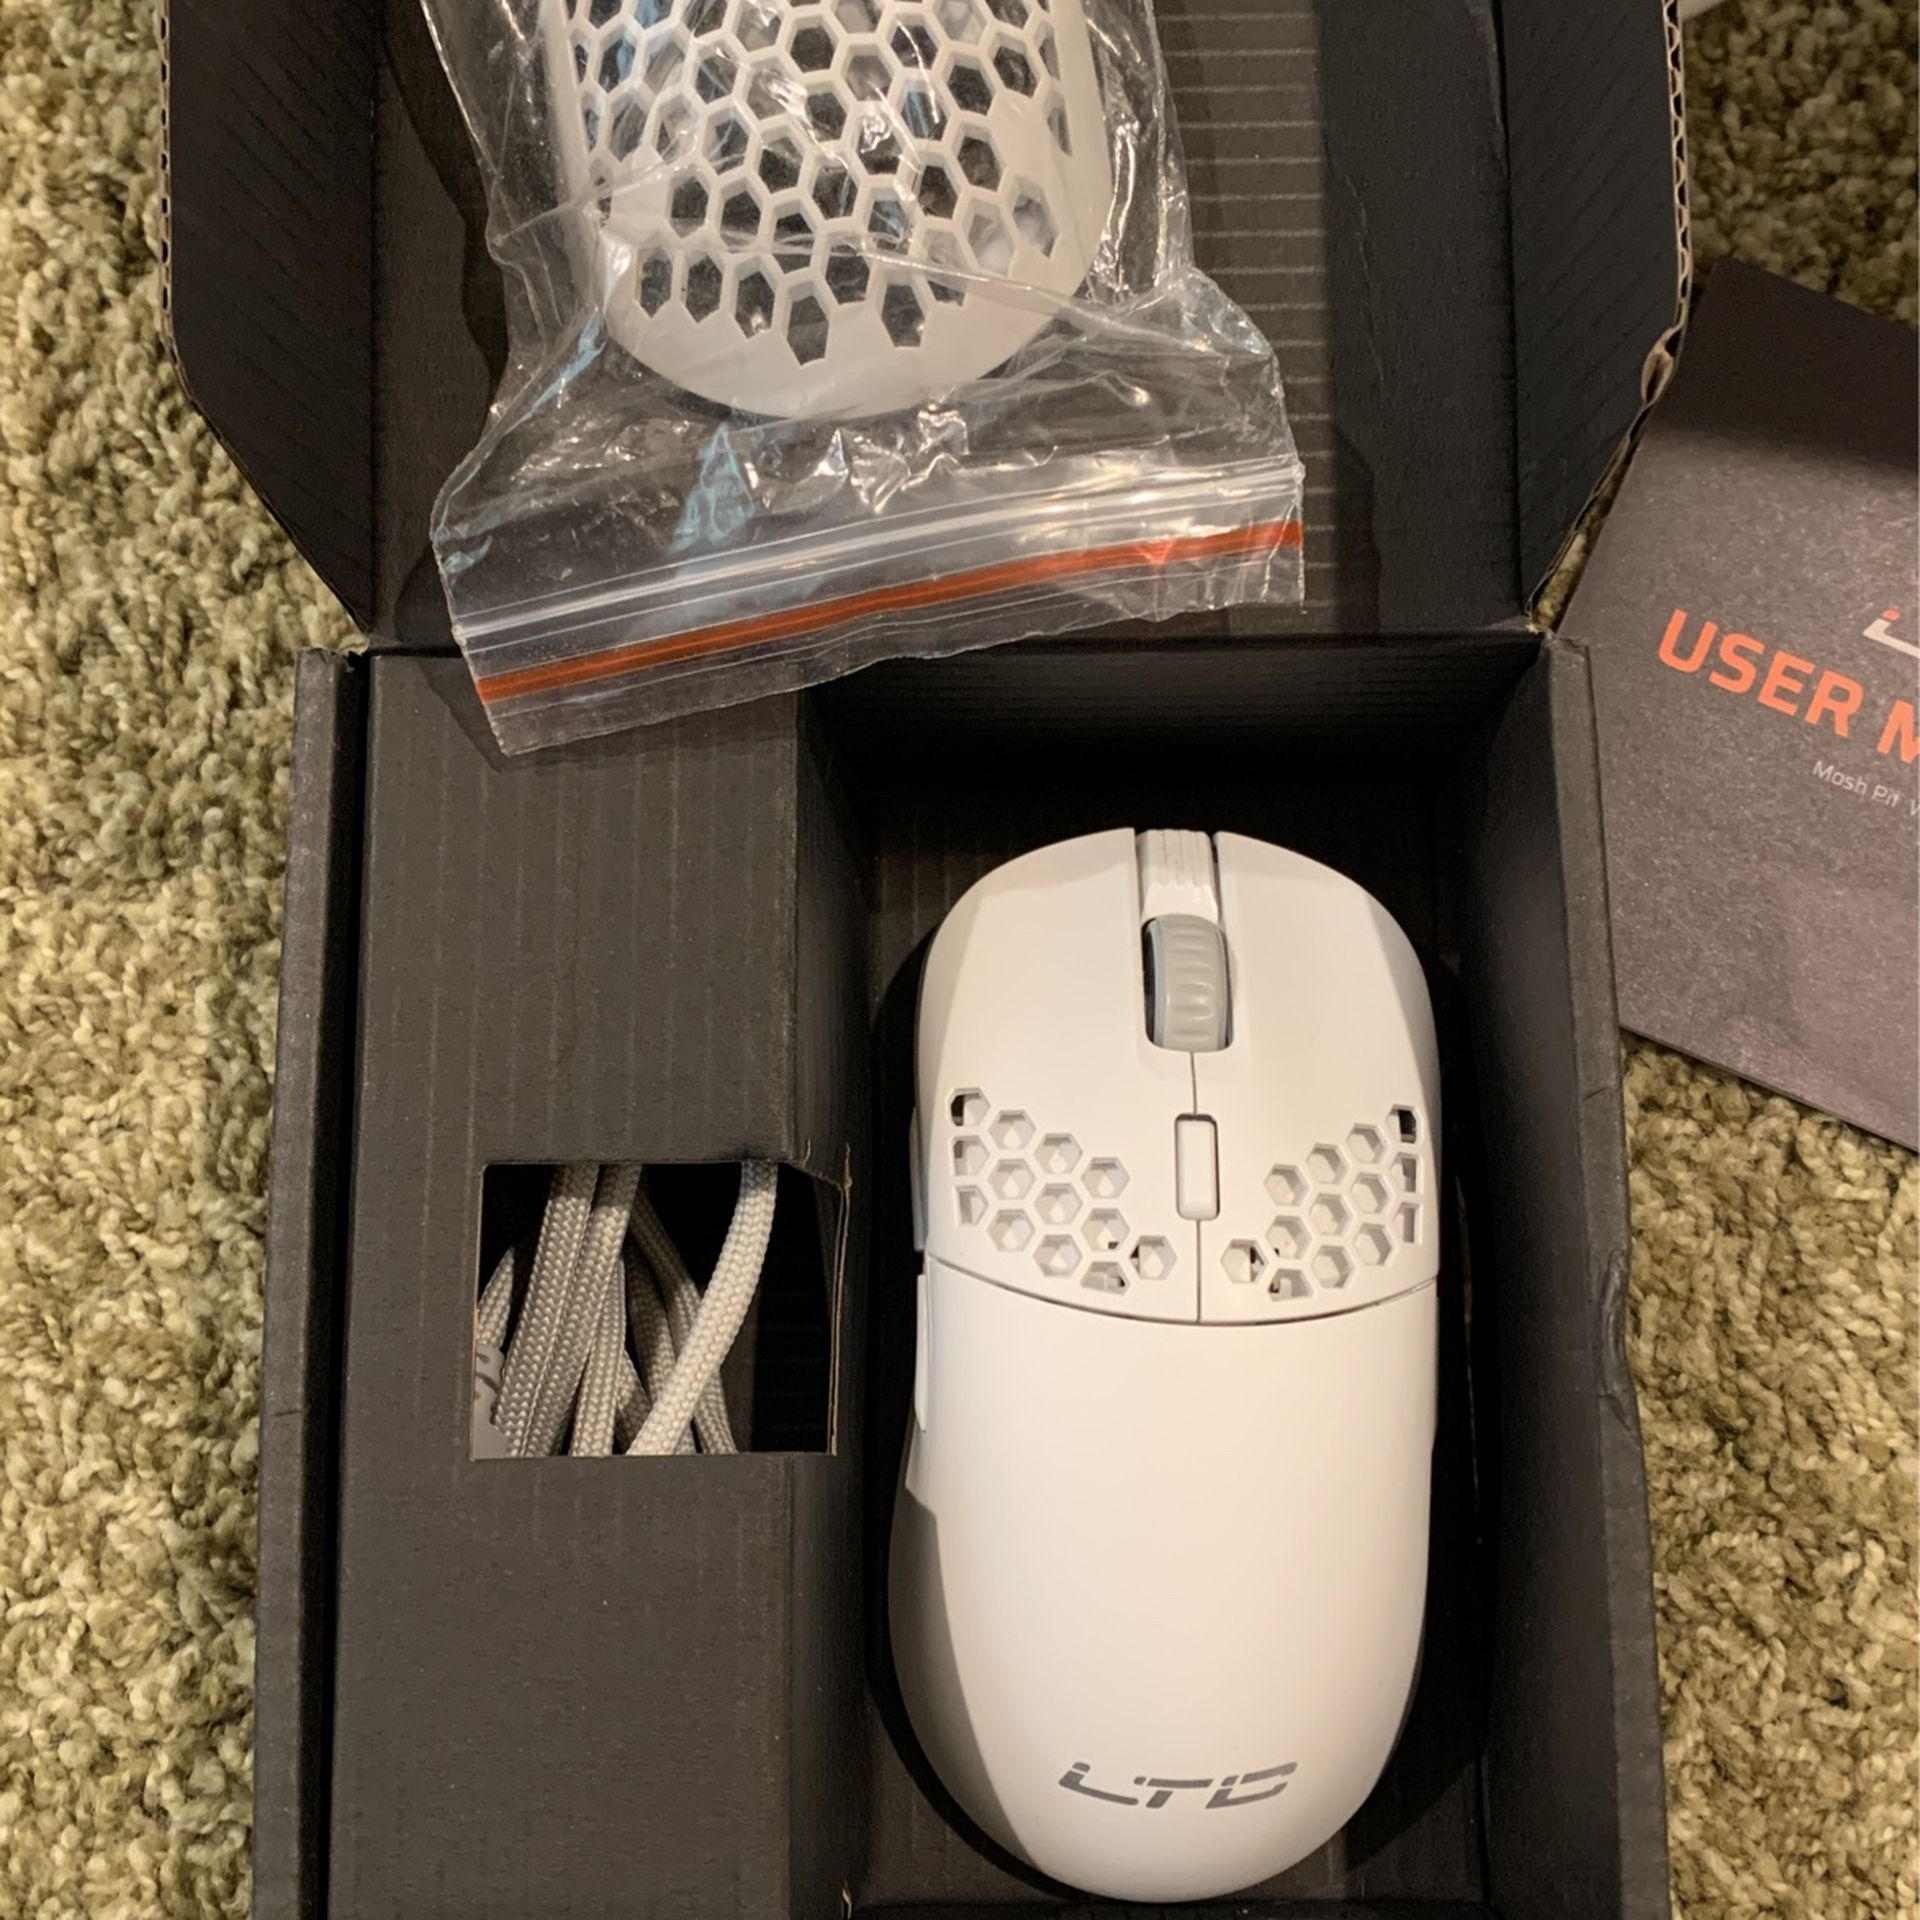 Ltc Gaming Mouse 